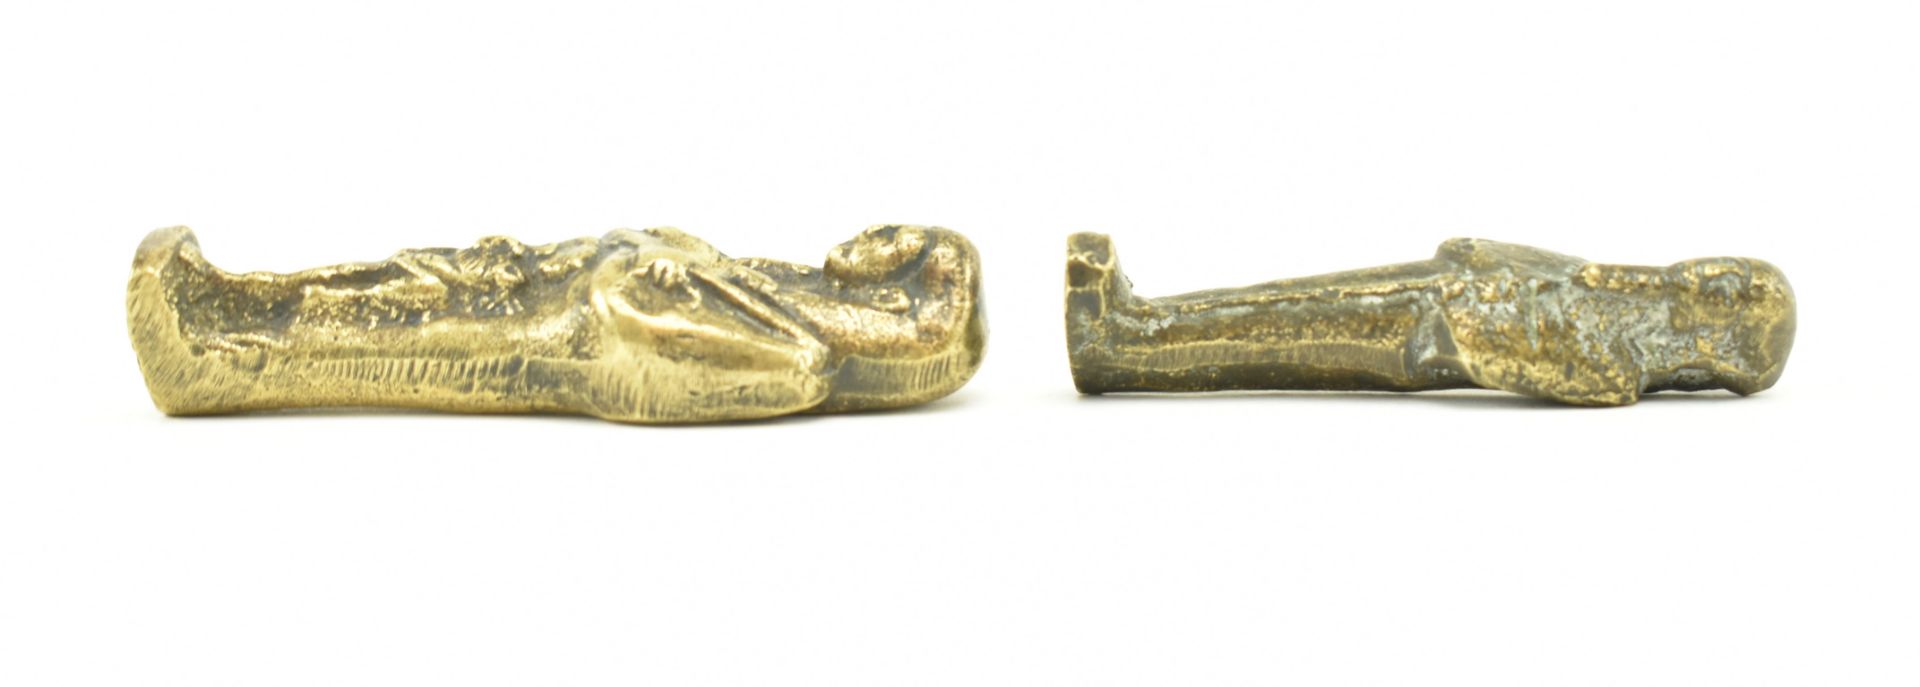 TWO EGYPTIAN GRAND TOUR SOLID BRASS FIGURINES OF PHARAOHS - Image 4 of 5